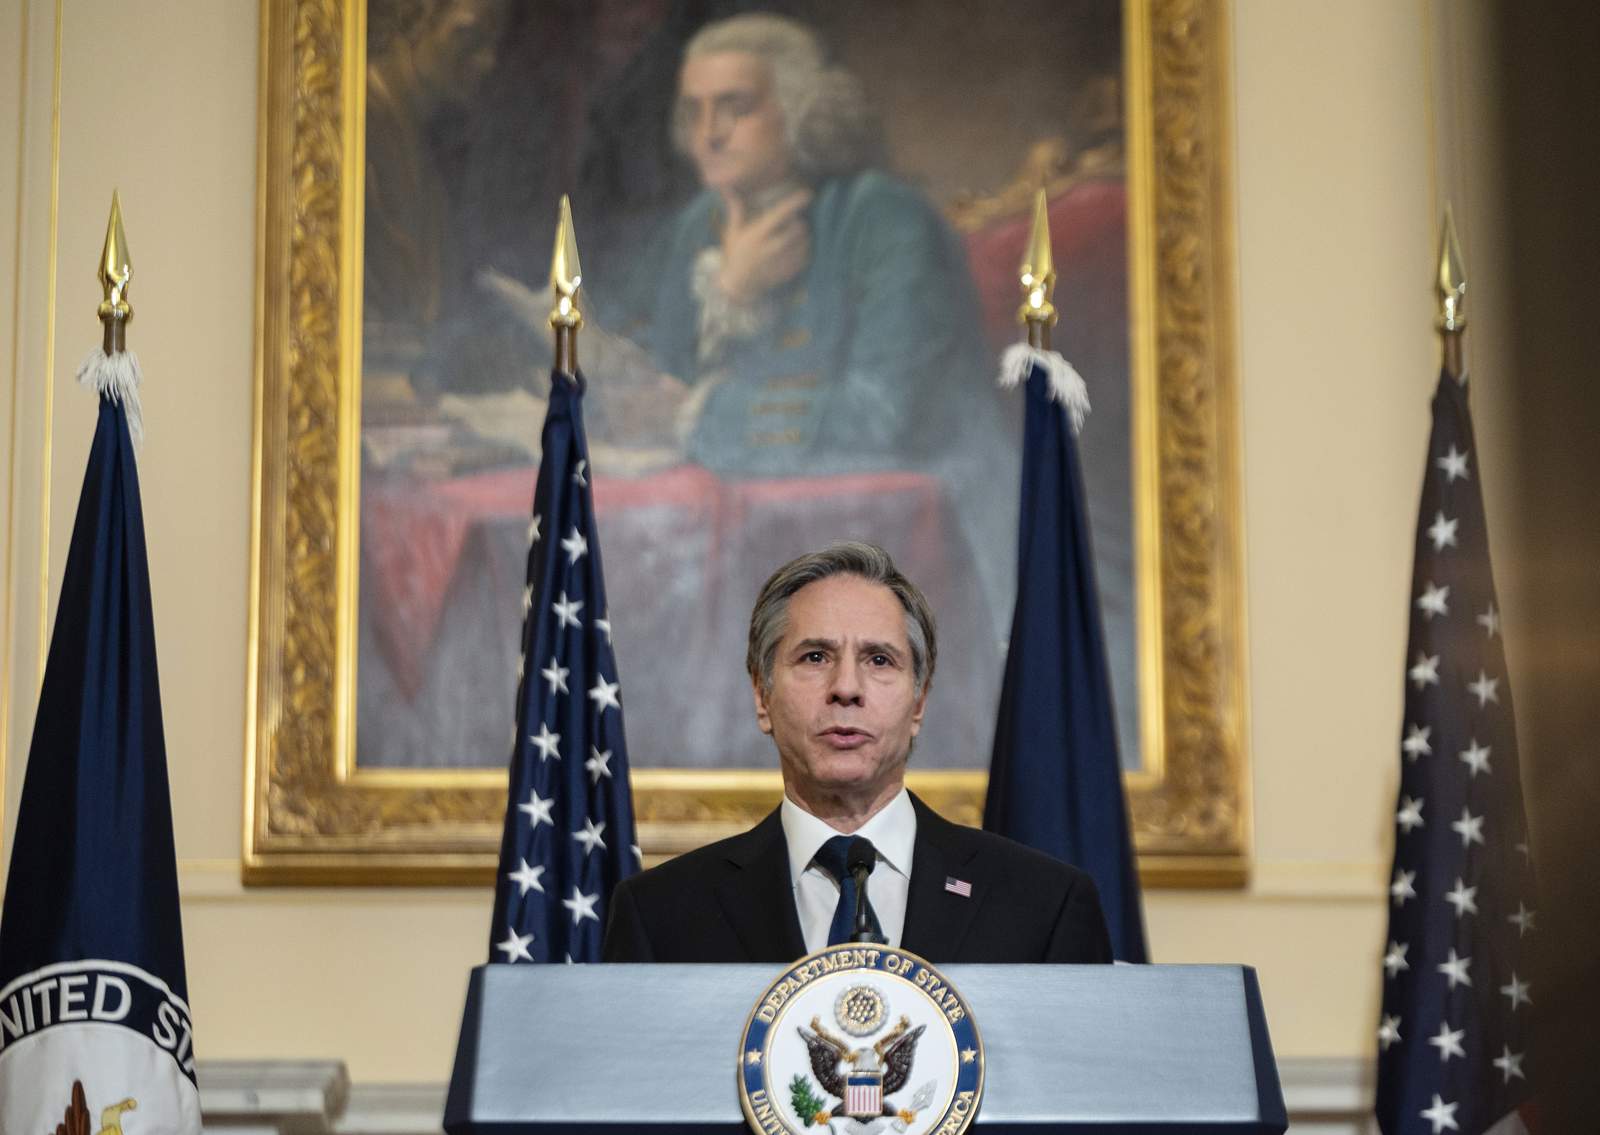 Report: Blinken offers plan to bolster Afghan peace process